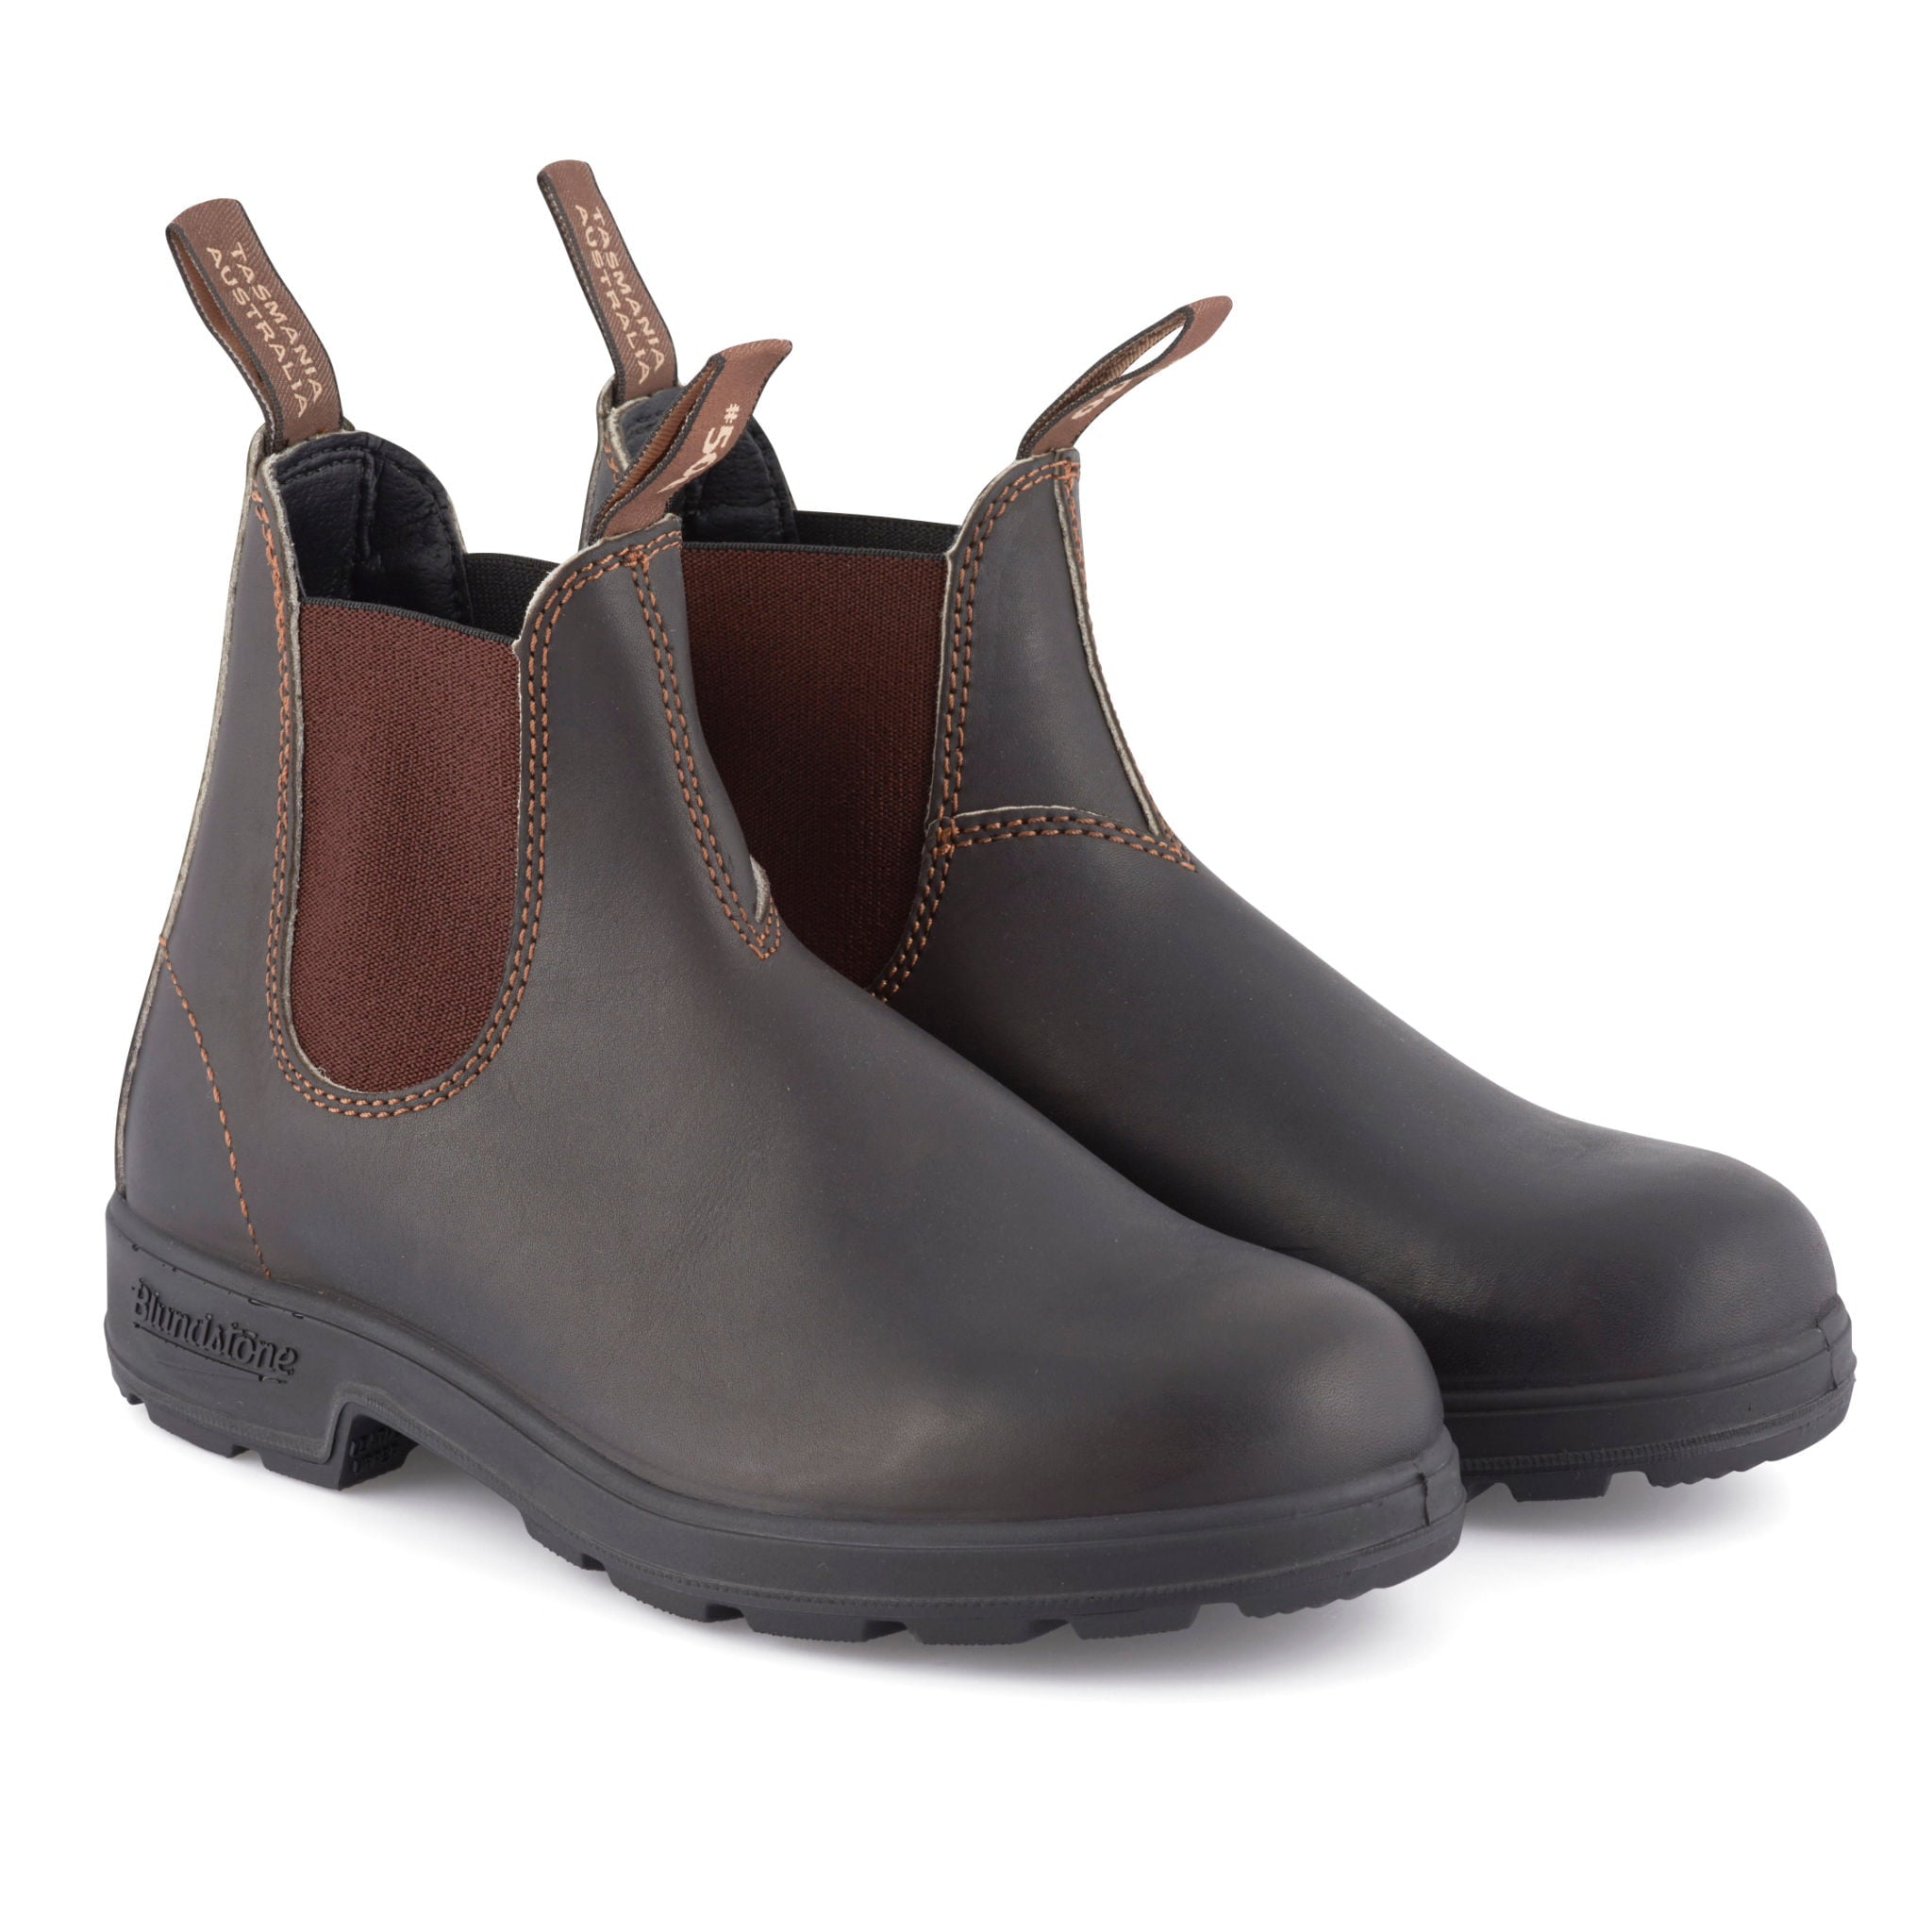 Blundstone 500 Leather Boots - Brown